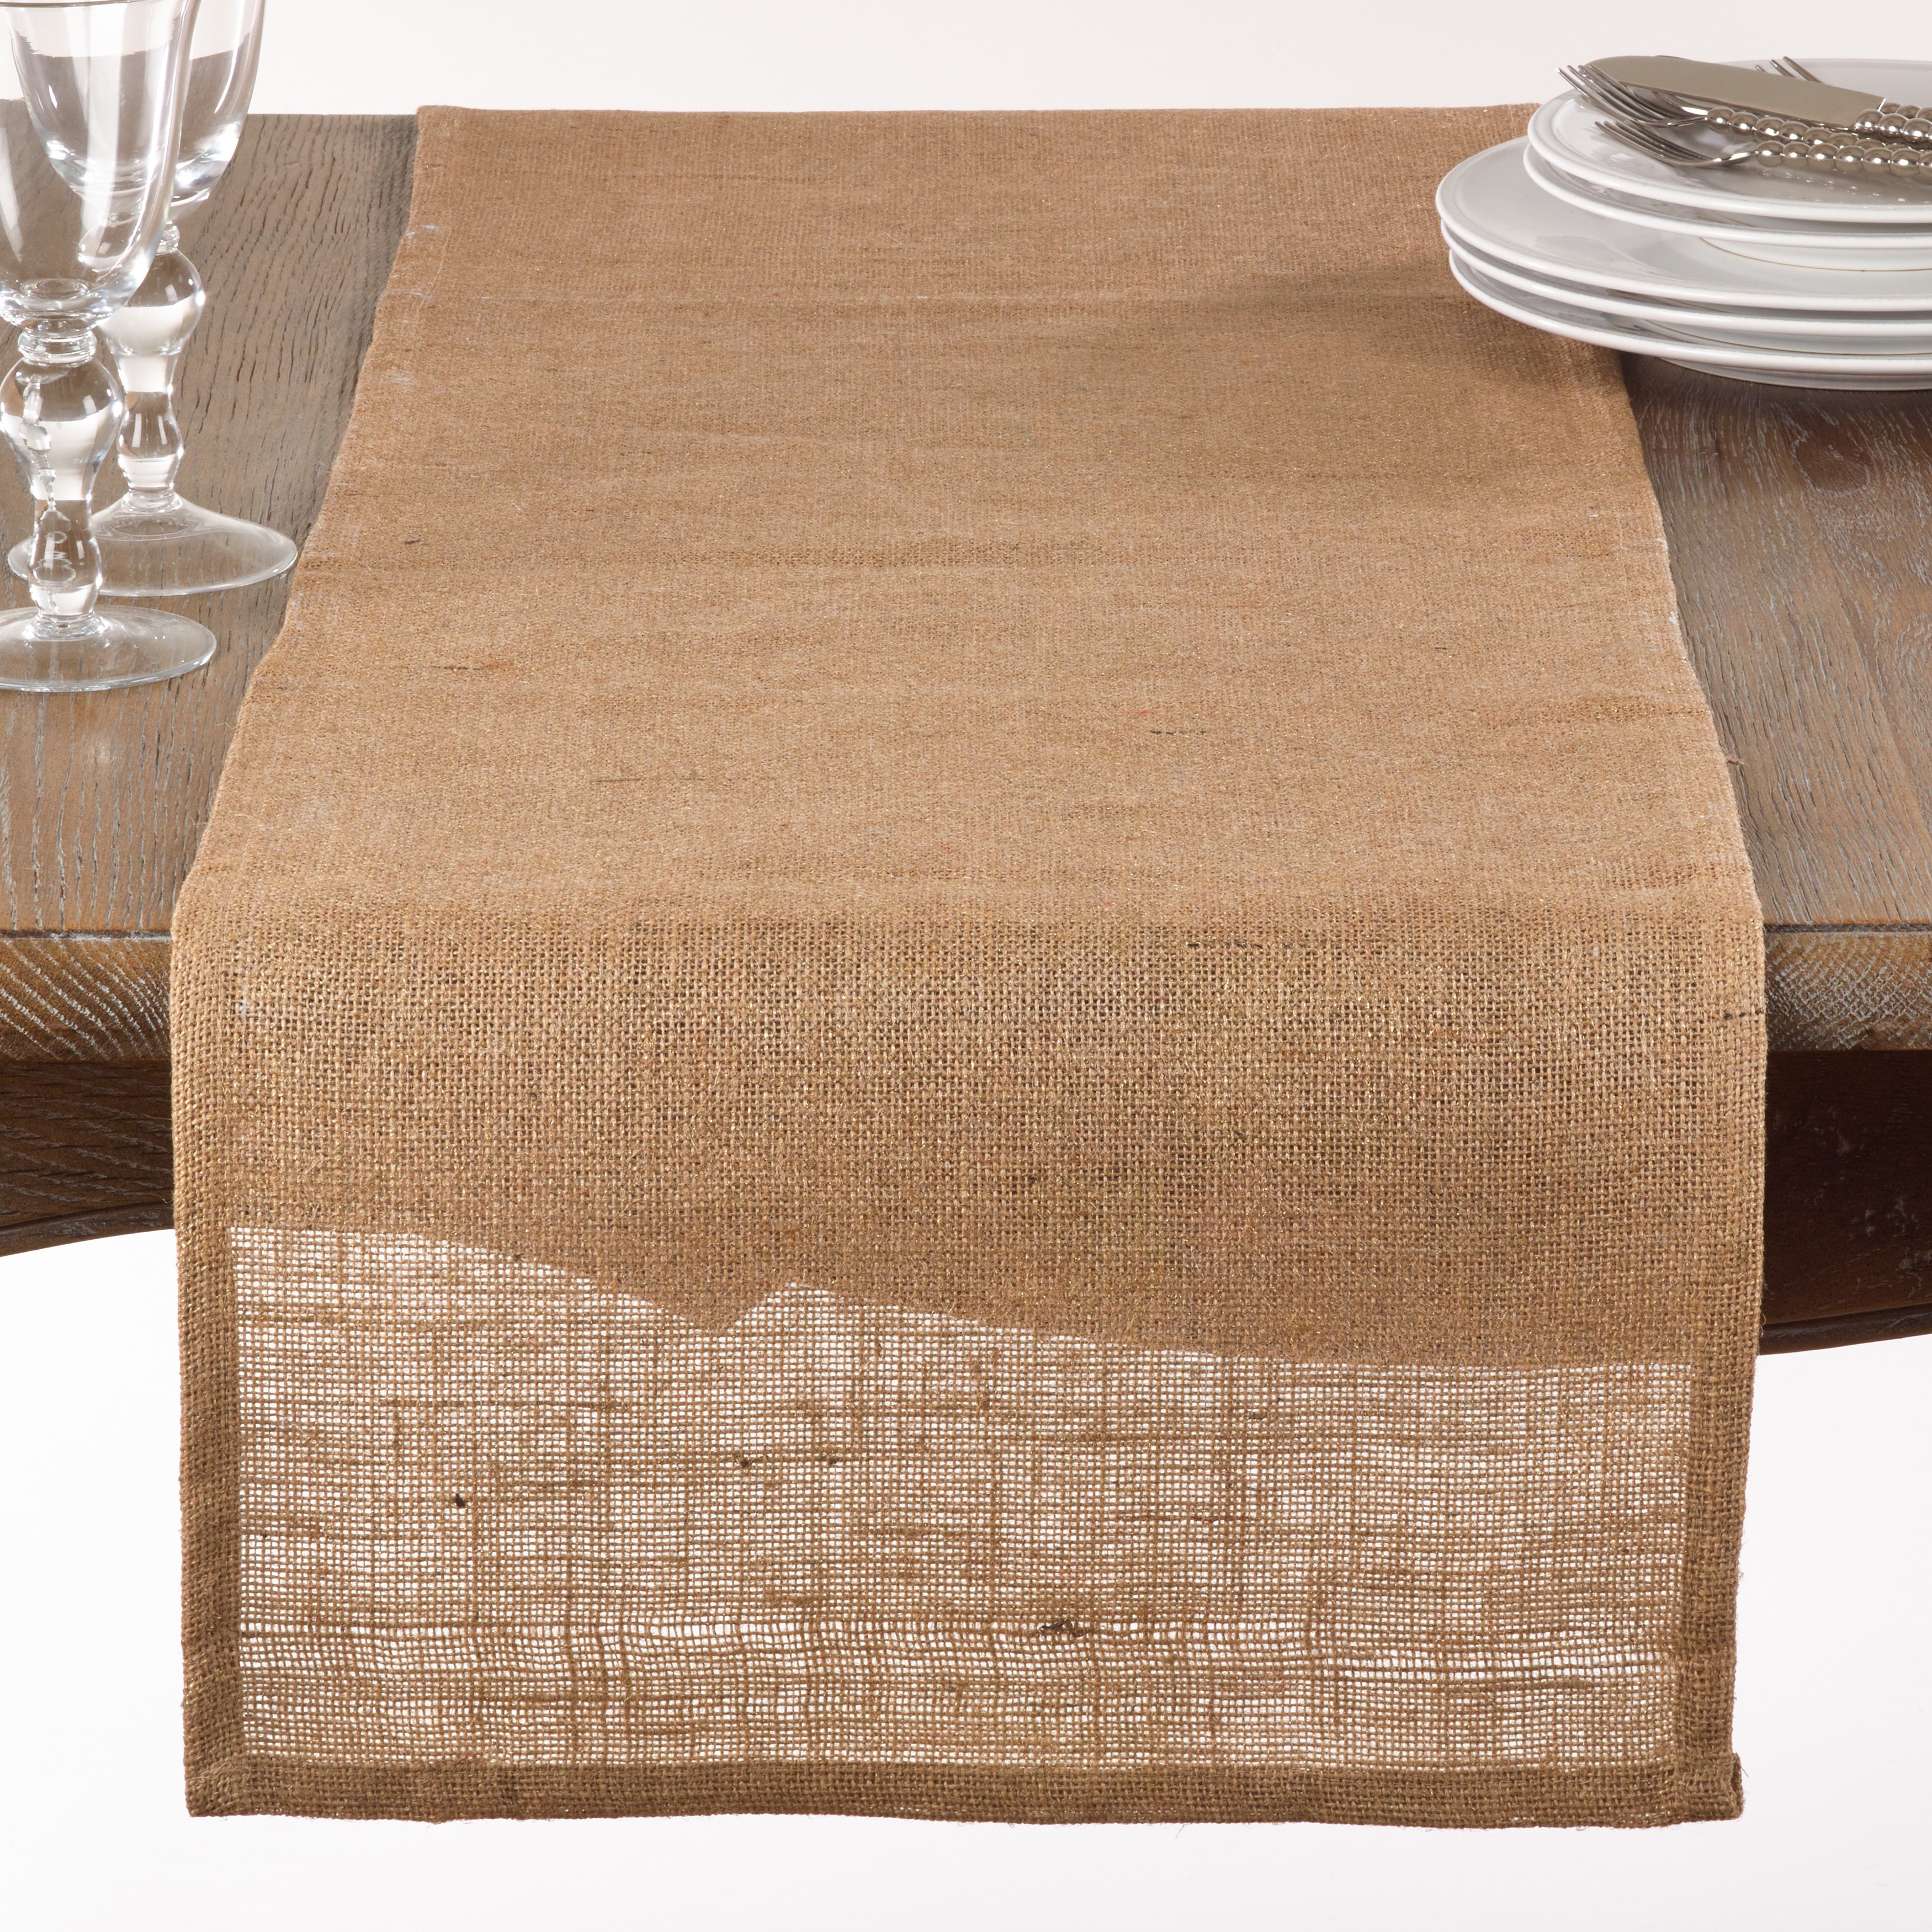 brown table runner and placemats